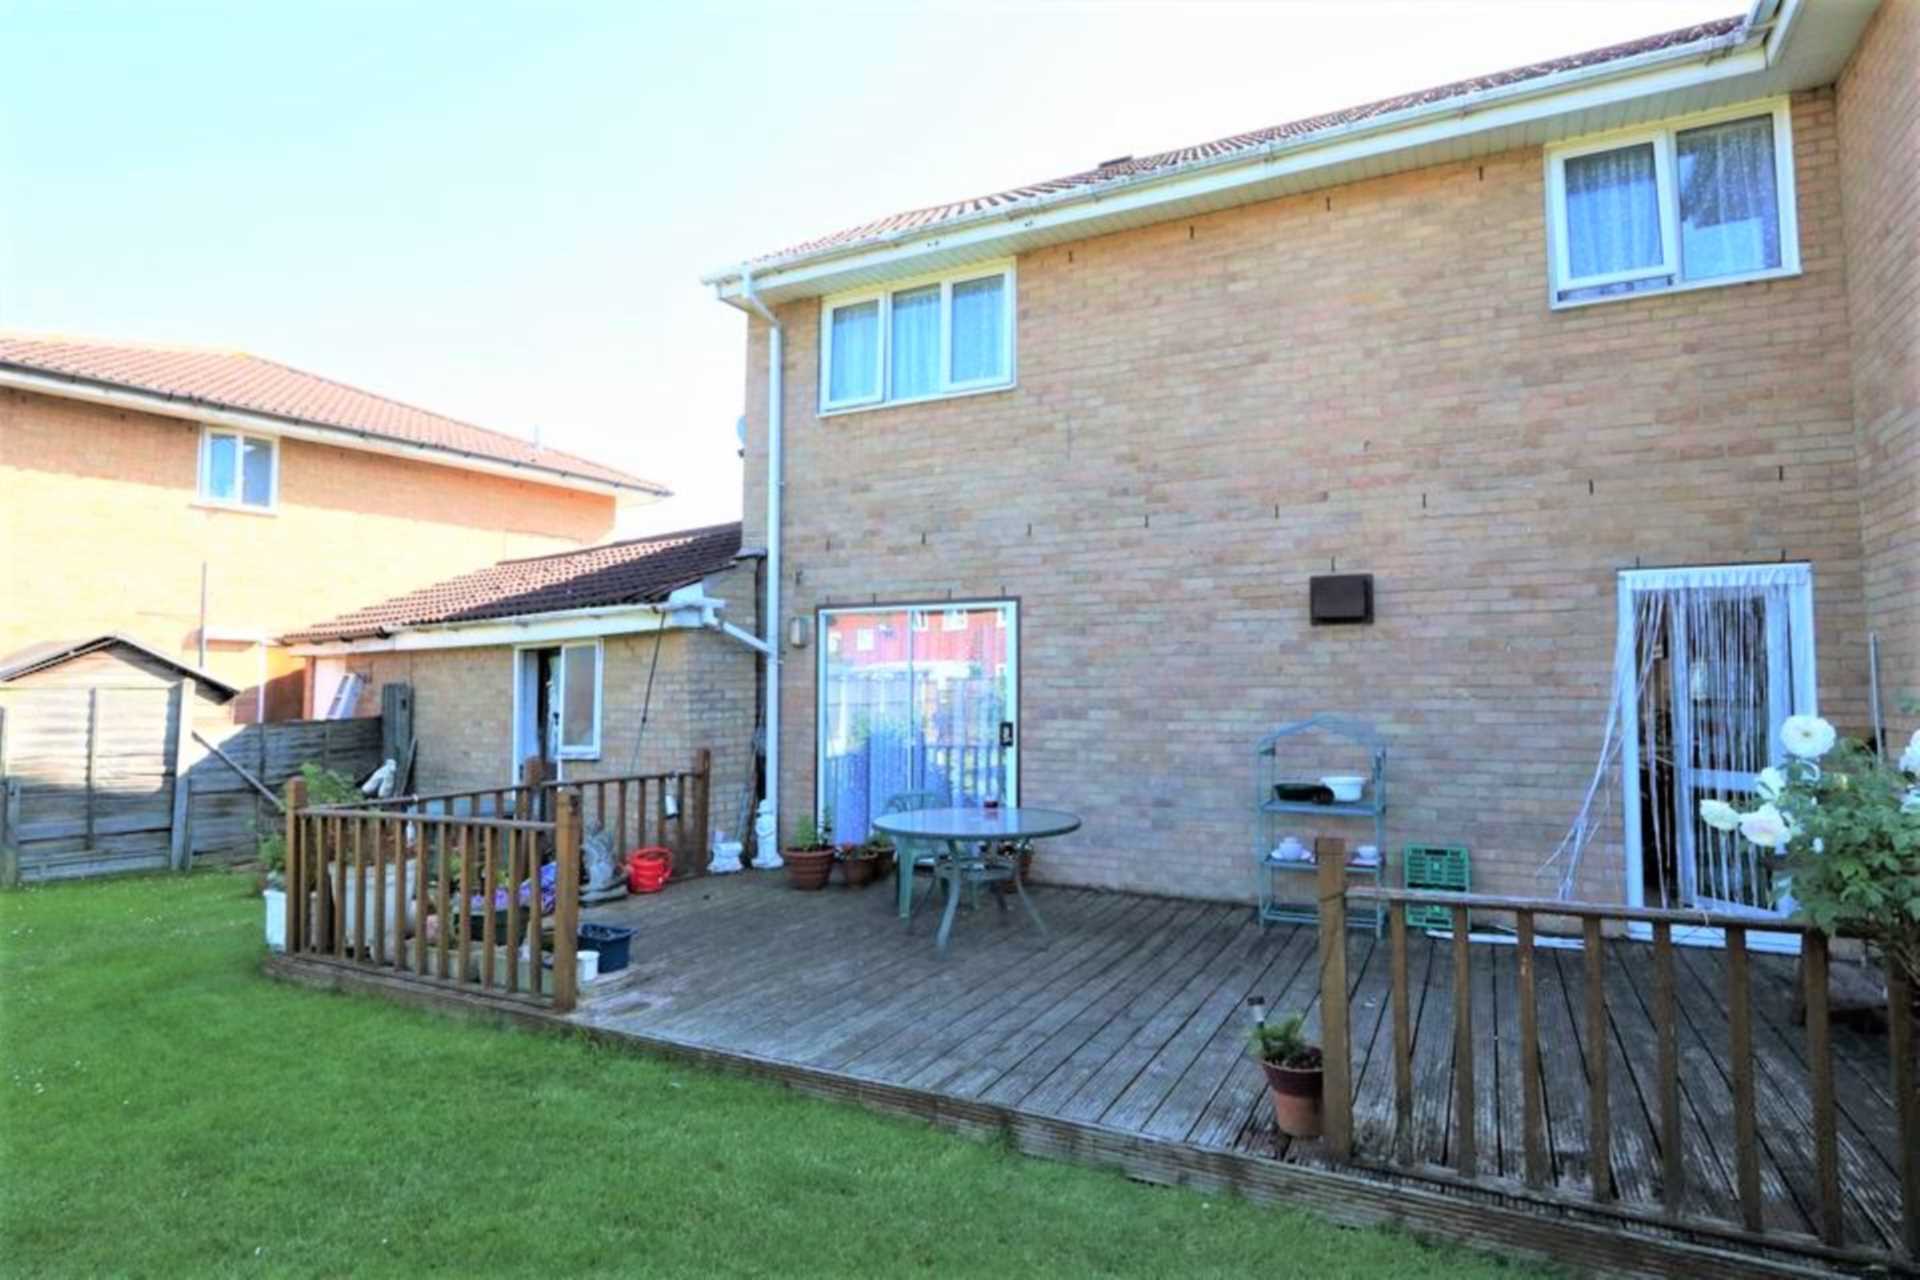 Coltsfoot Court, Little Thurrock, RM17, Image 2